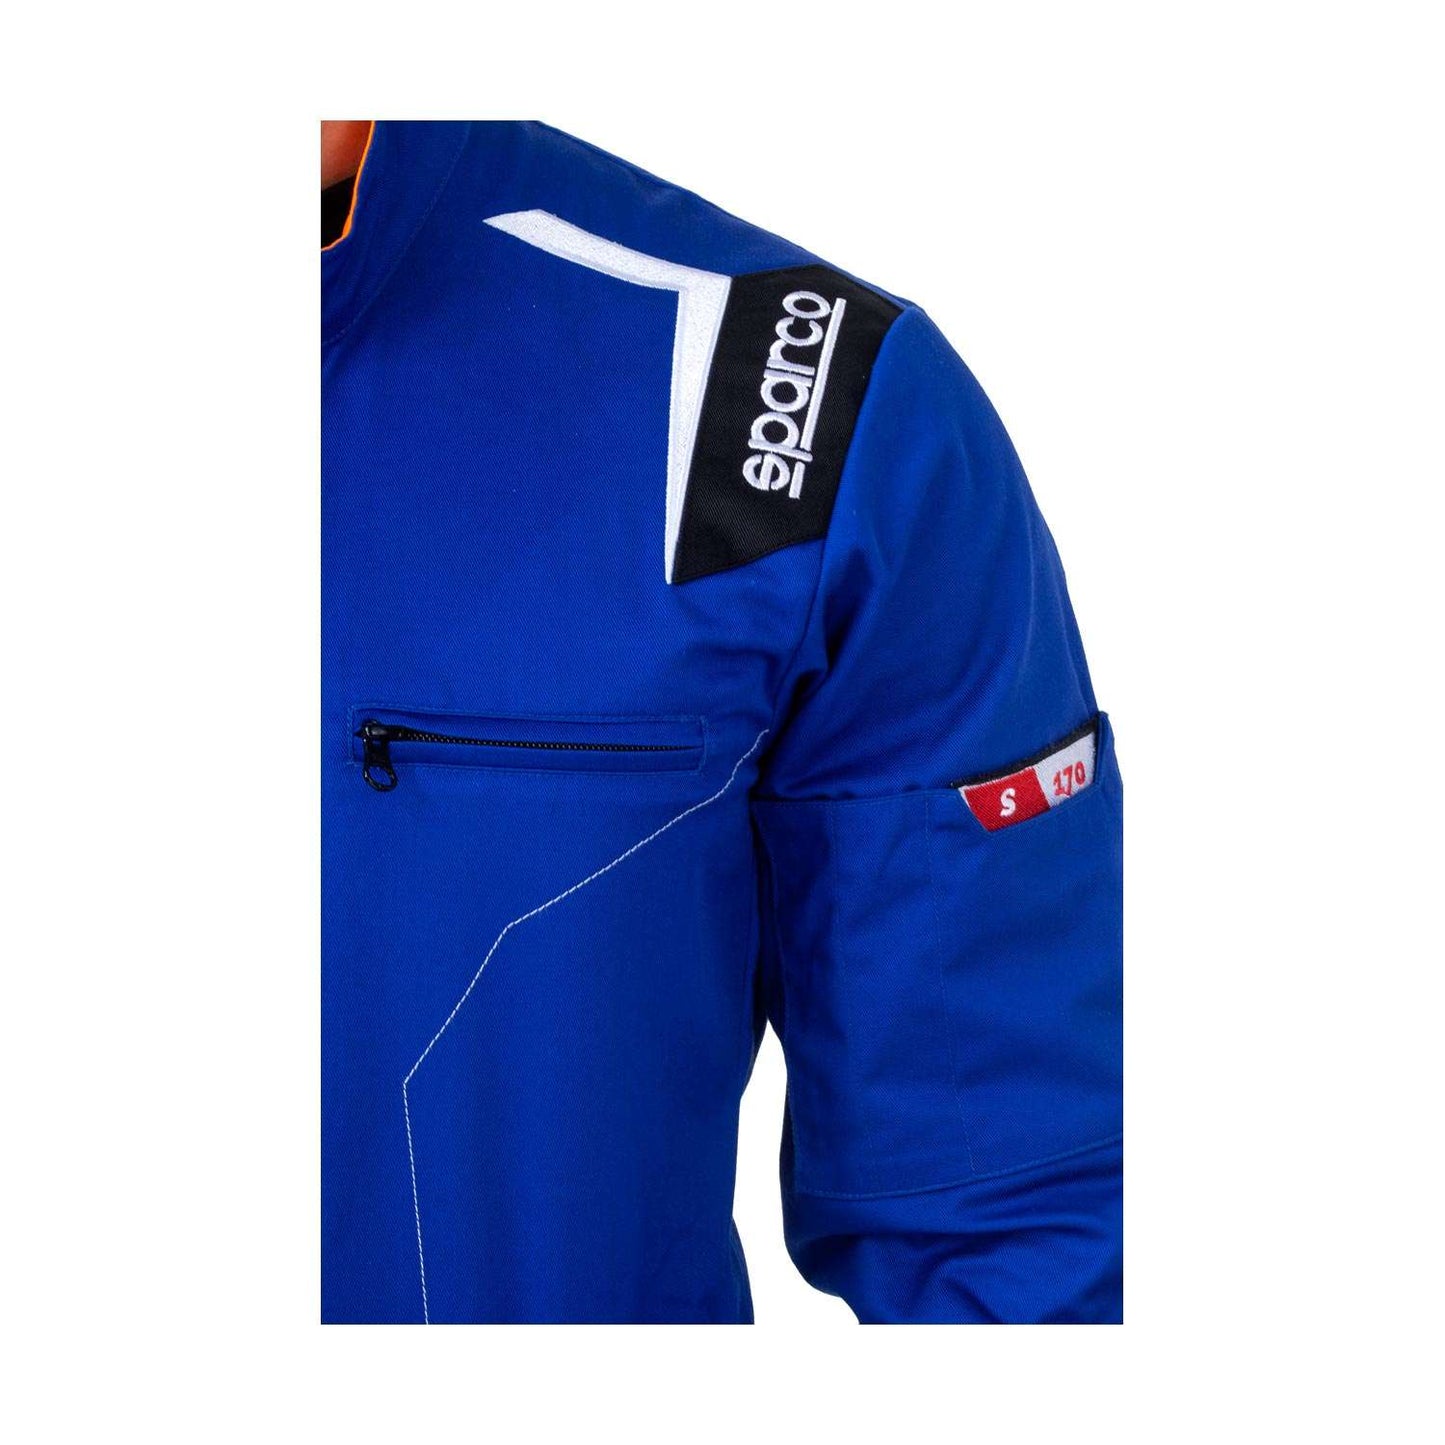 Sparco MS-4 Mechanic Overalls red